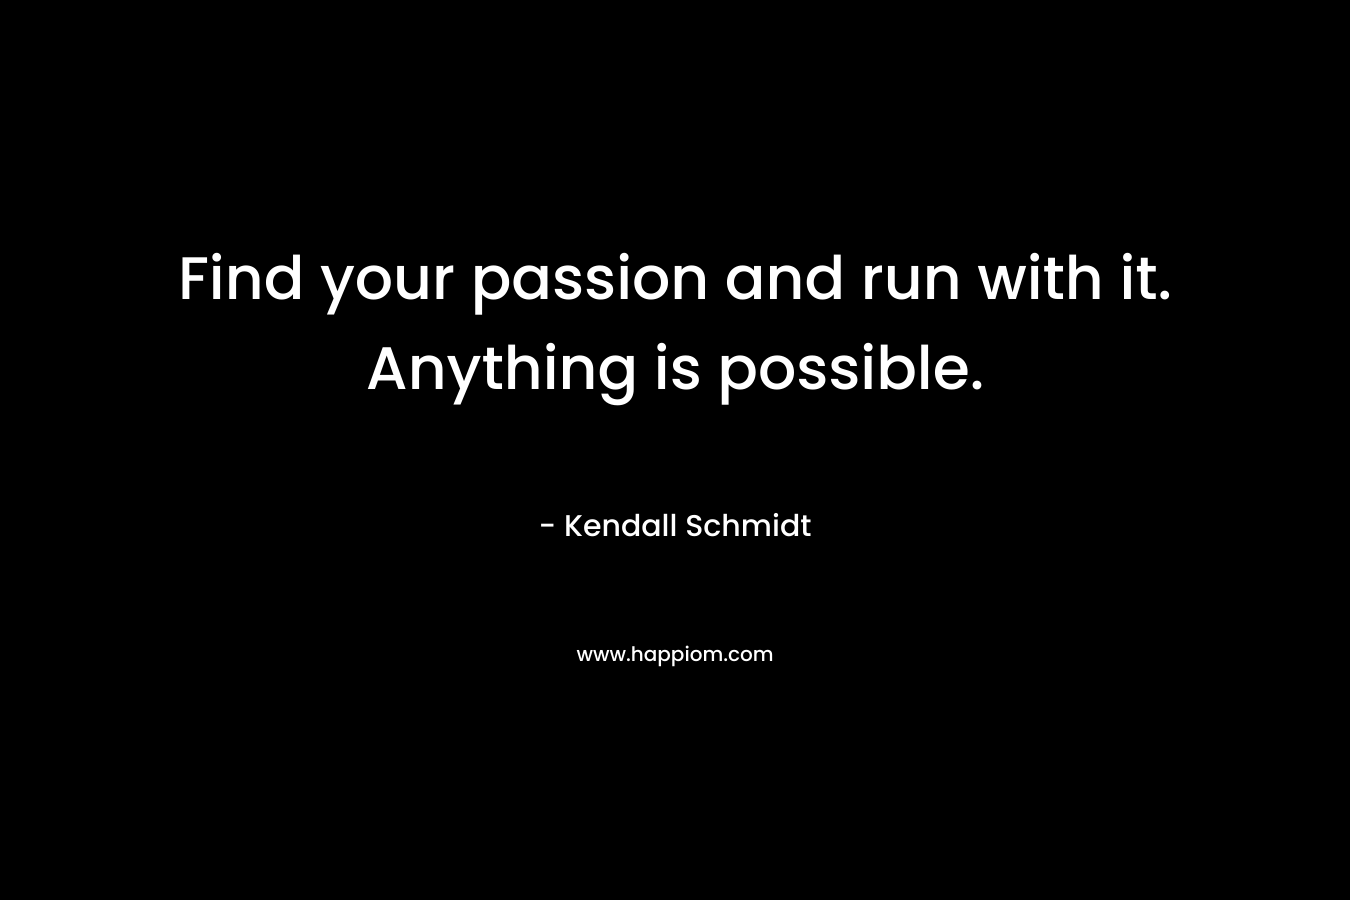 Find your passion and run with it. Anything is possible.